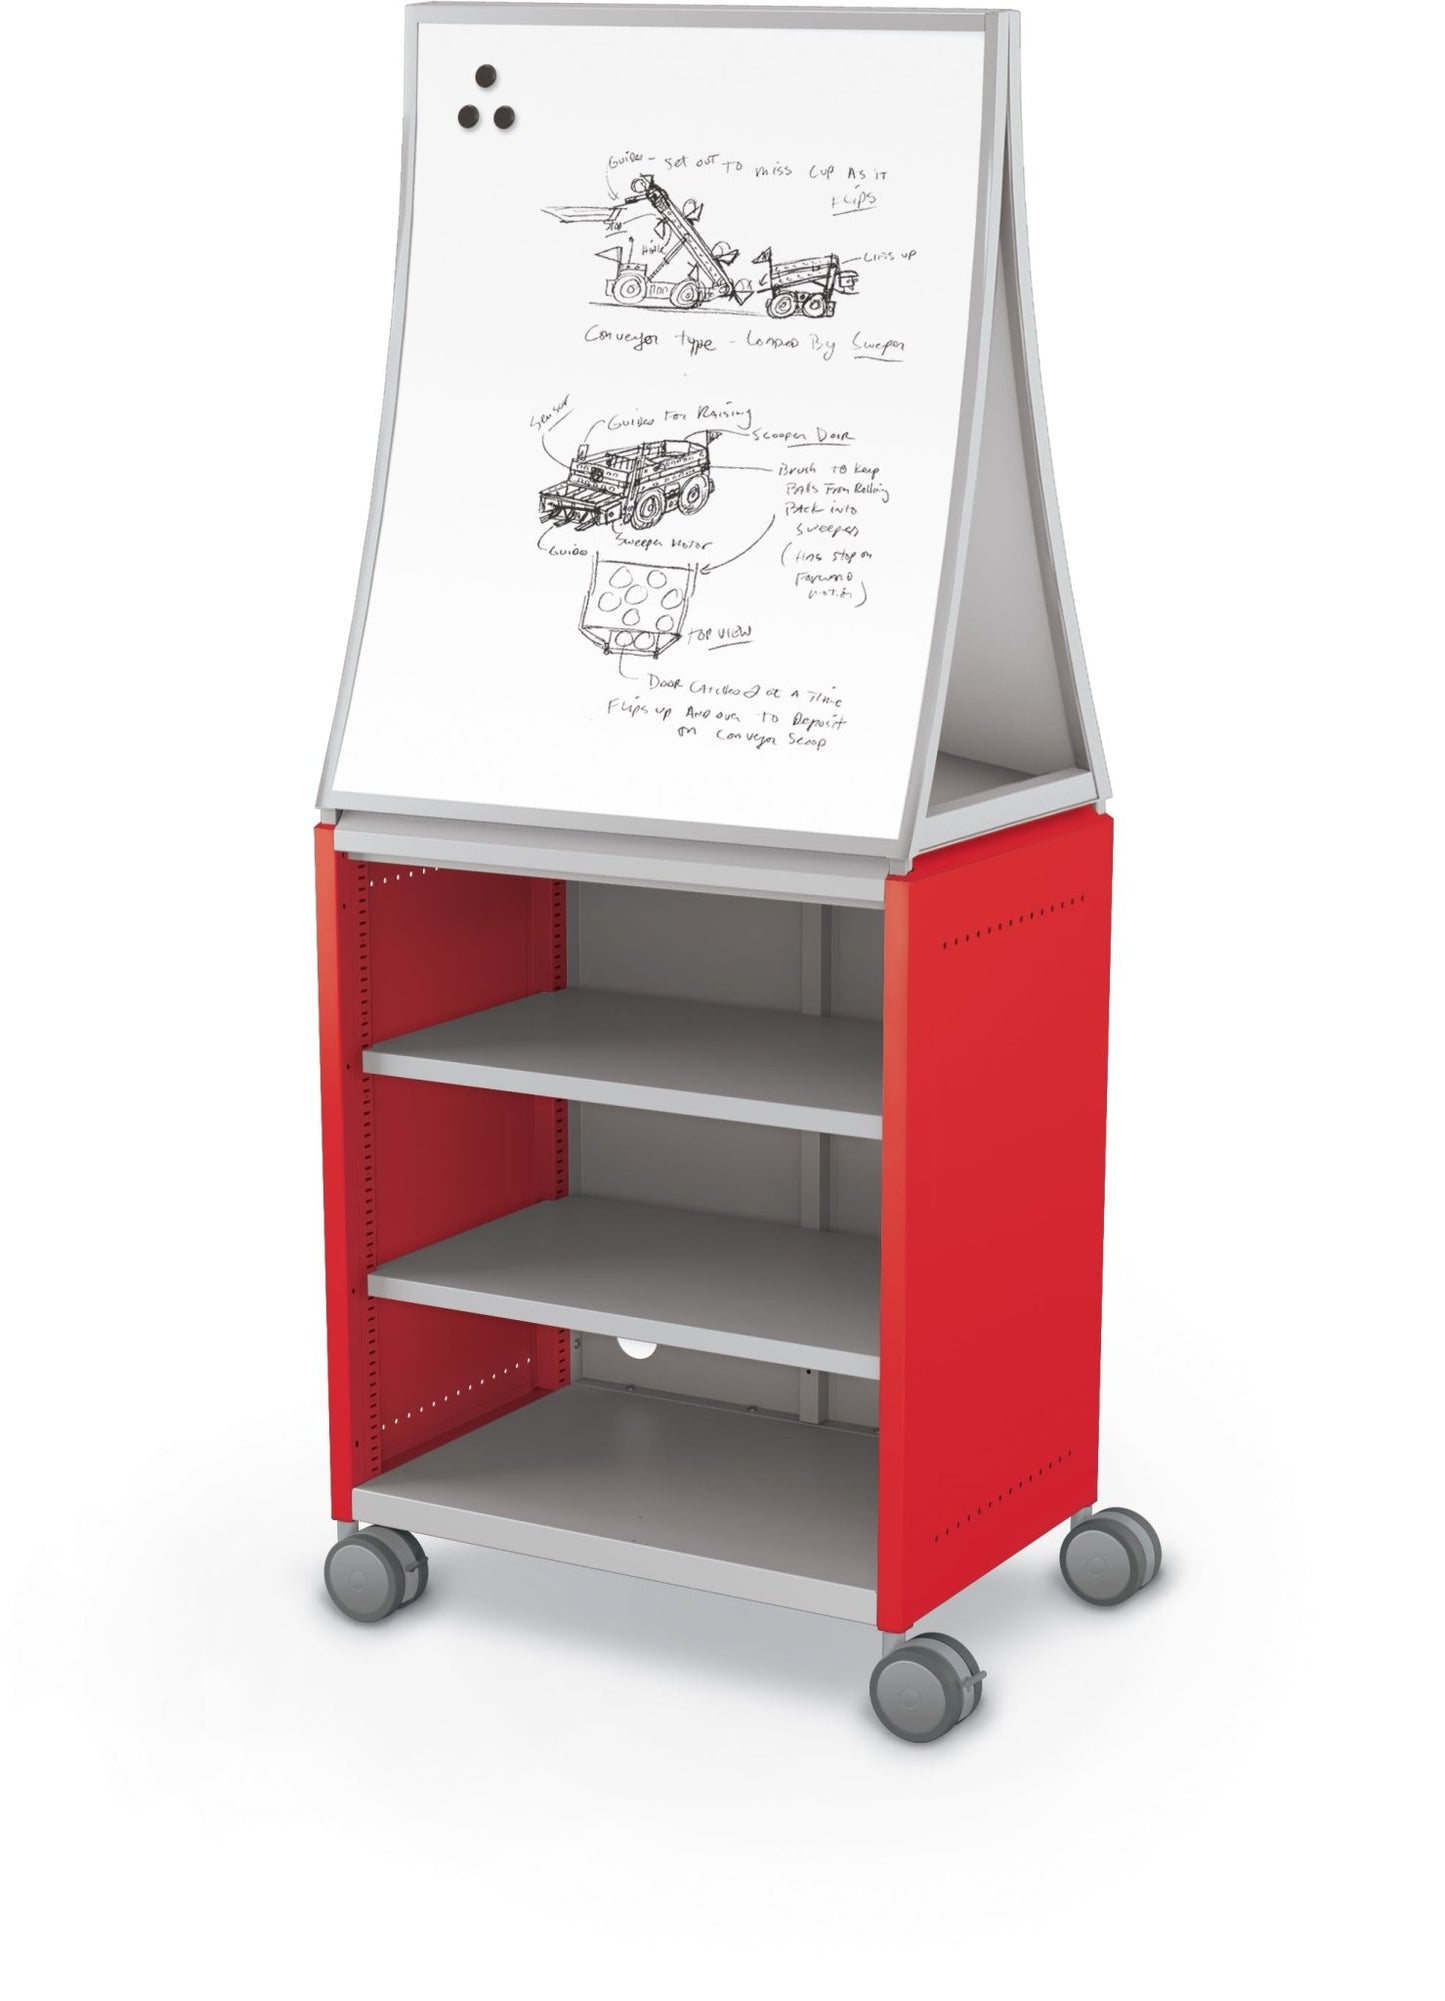 Mooreco Compass Cabinet Midi H2 Standard Back and Side Panels - No Doors with Shelves, Casters and Ogee Board (MOR-B2A1X1D1B0) - SchoolOutlet